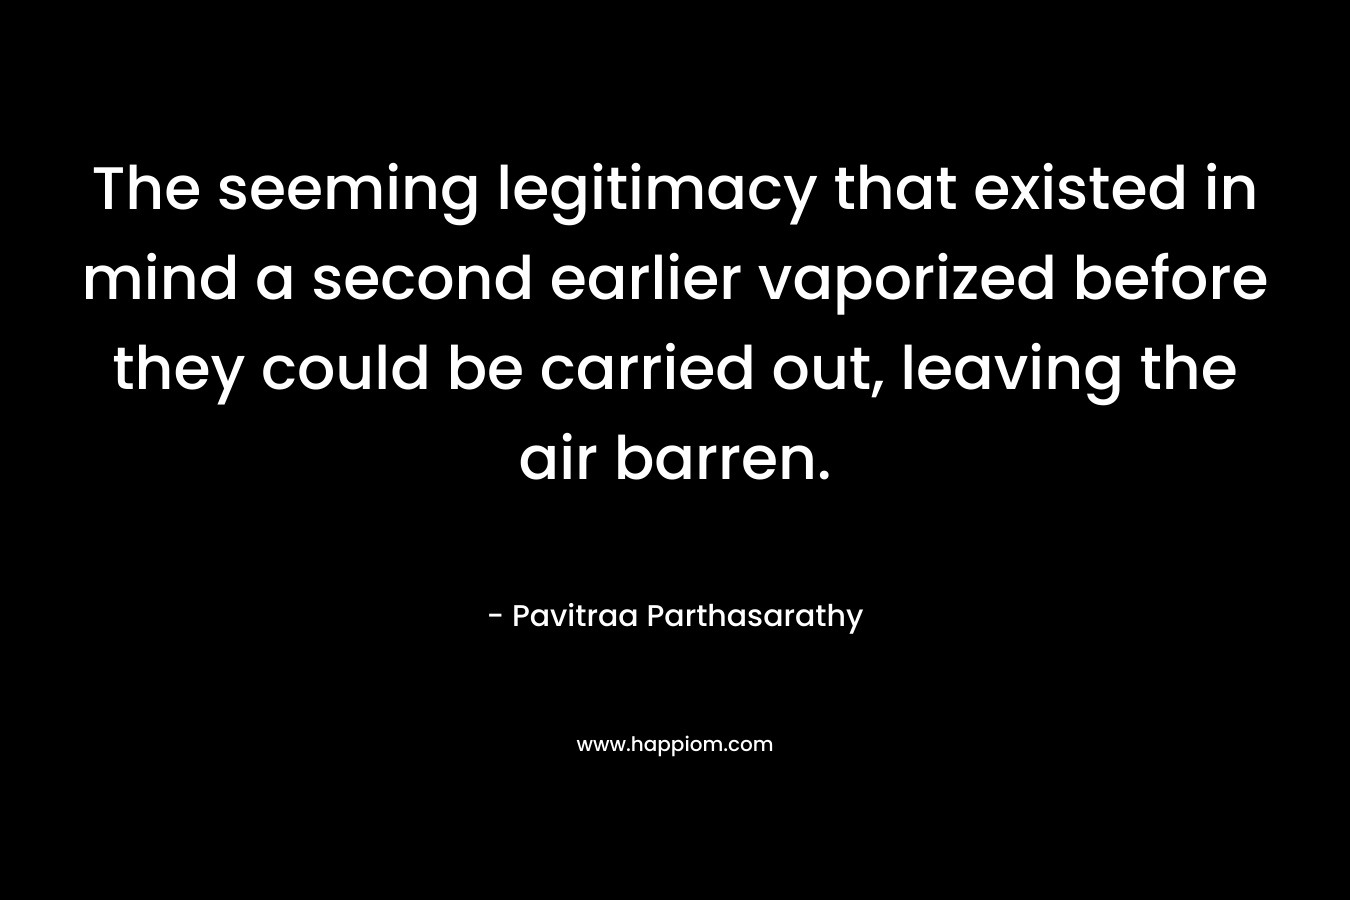 The seeming legitimacy that existed in mind a second earlier vaporized before they could be carried out, leaving the air barren. – Pavitraa Parthasarathy